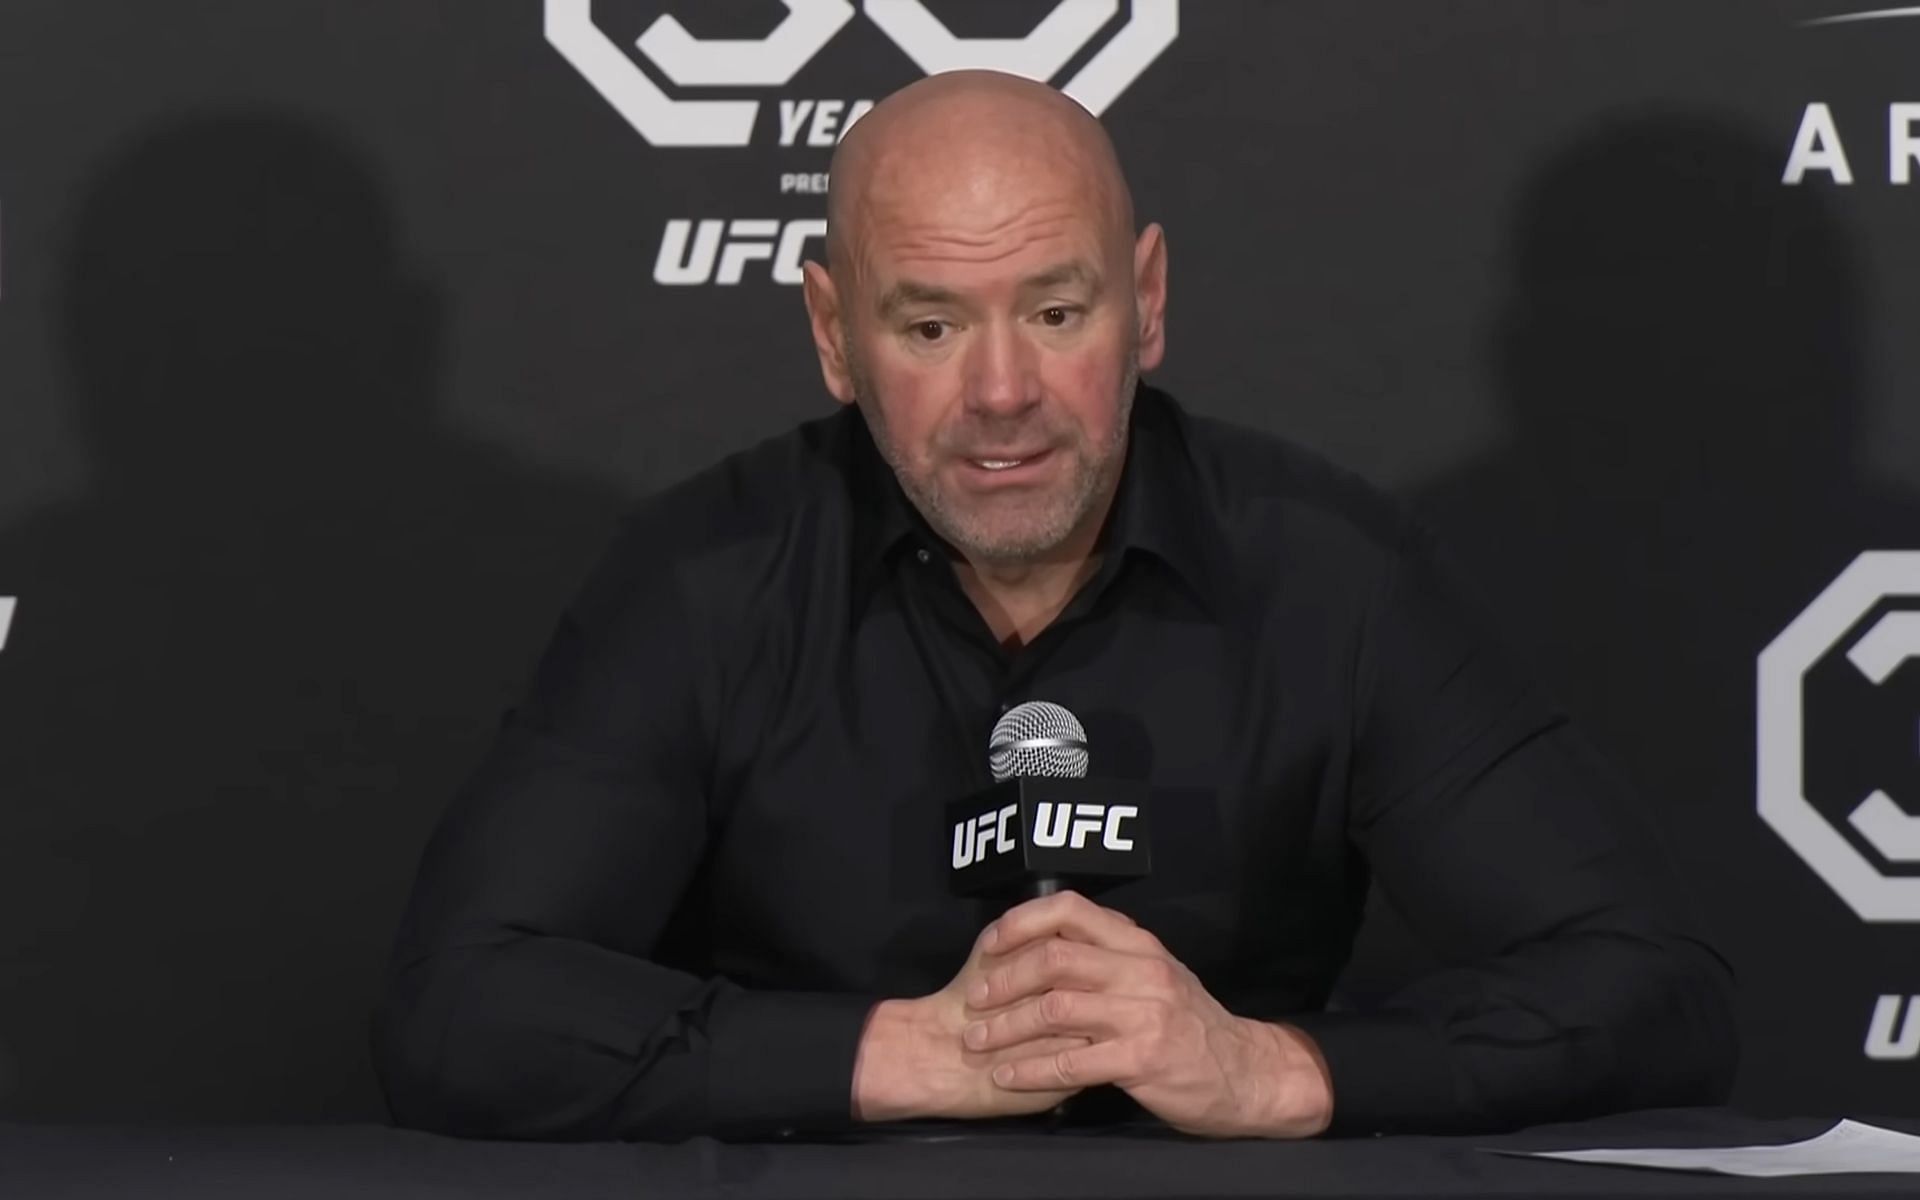 Dana White does not approve of Soccer (Image Courtesy: UFC YouTube)